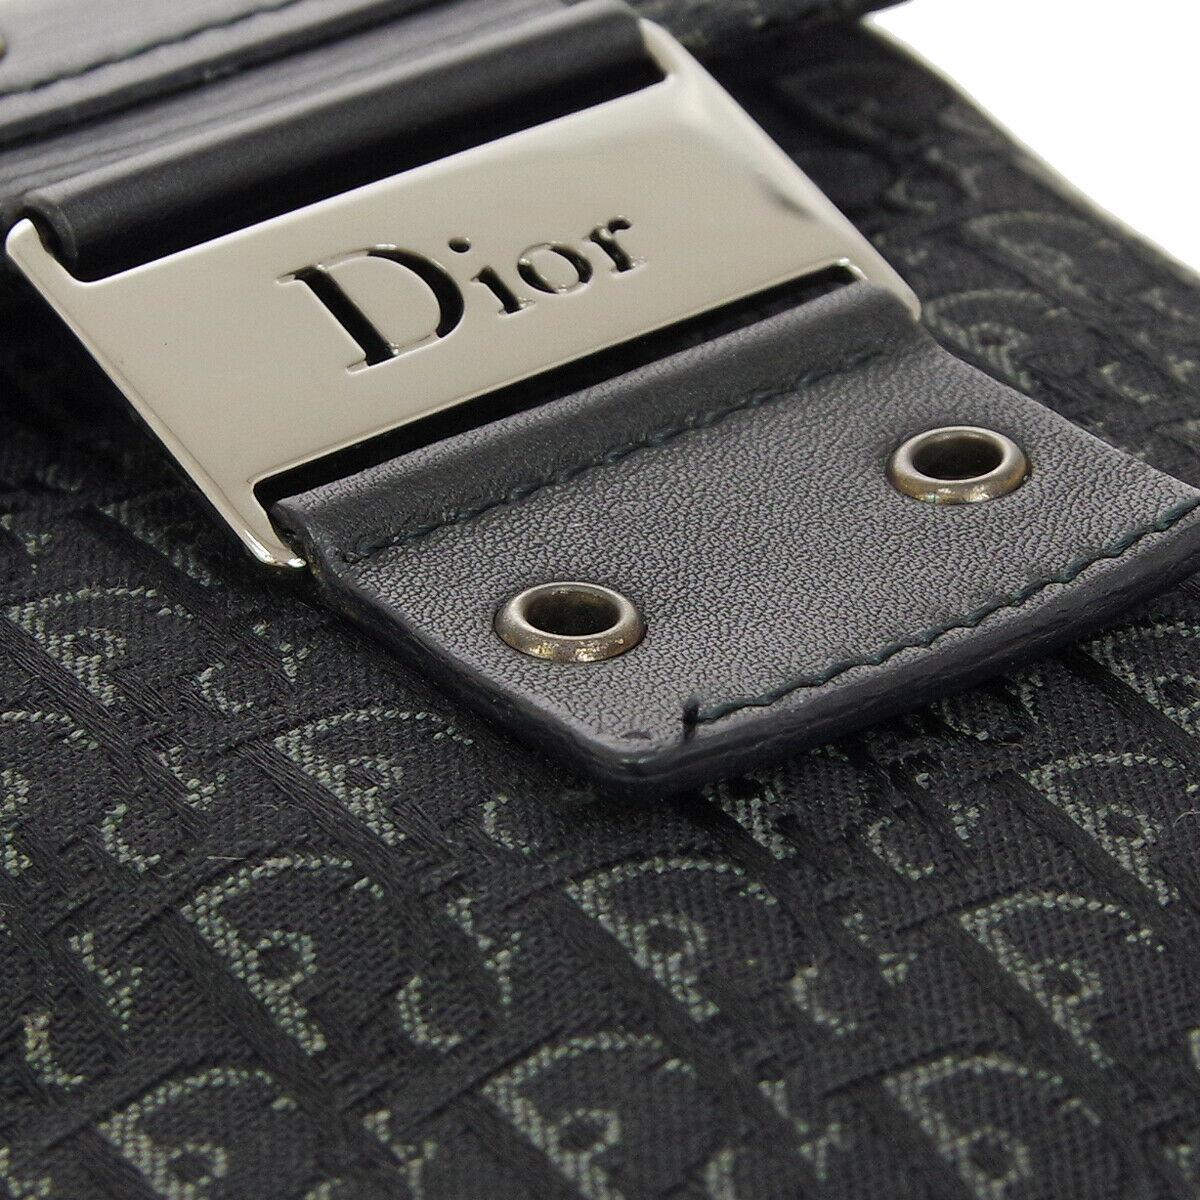 Christian Dior Black Monogram Evening Small Saddle Silver Top Handle Satchel Box Bag

Monogram canvas
Leather
Silver tone hardware
Woven lining
Made in Spain
Handle drop 3.5